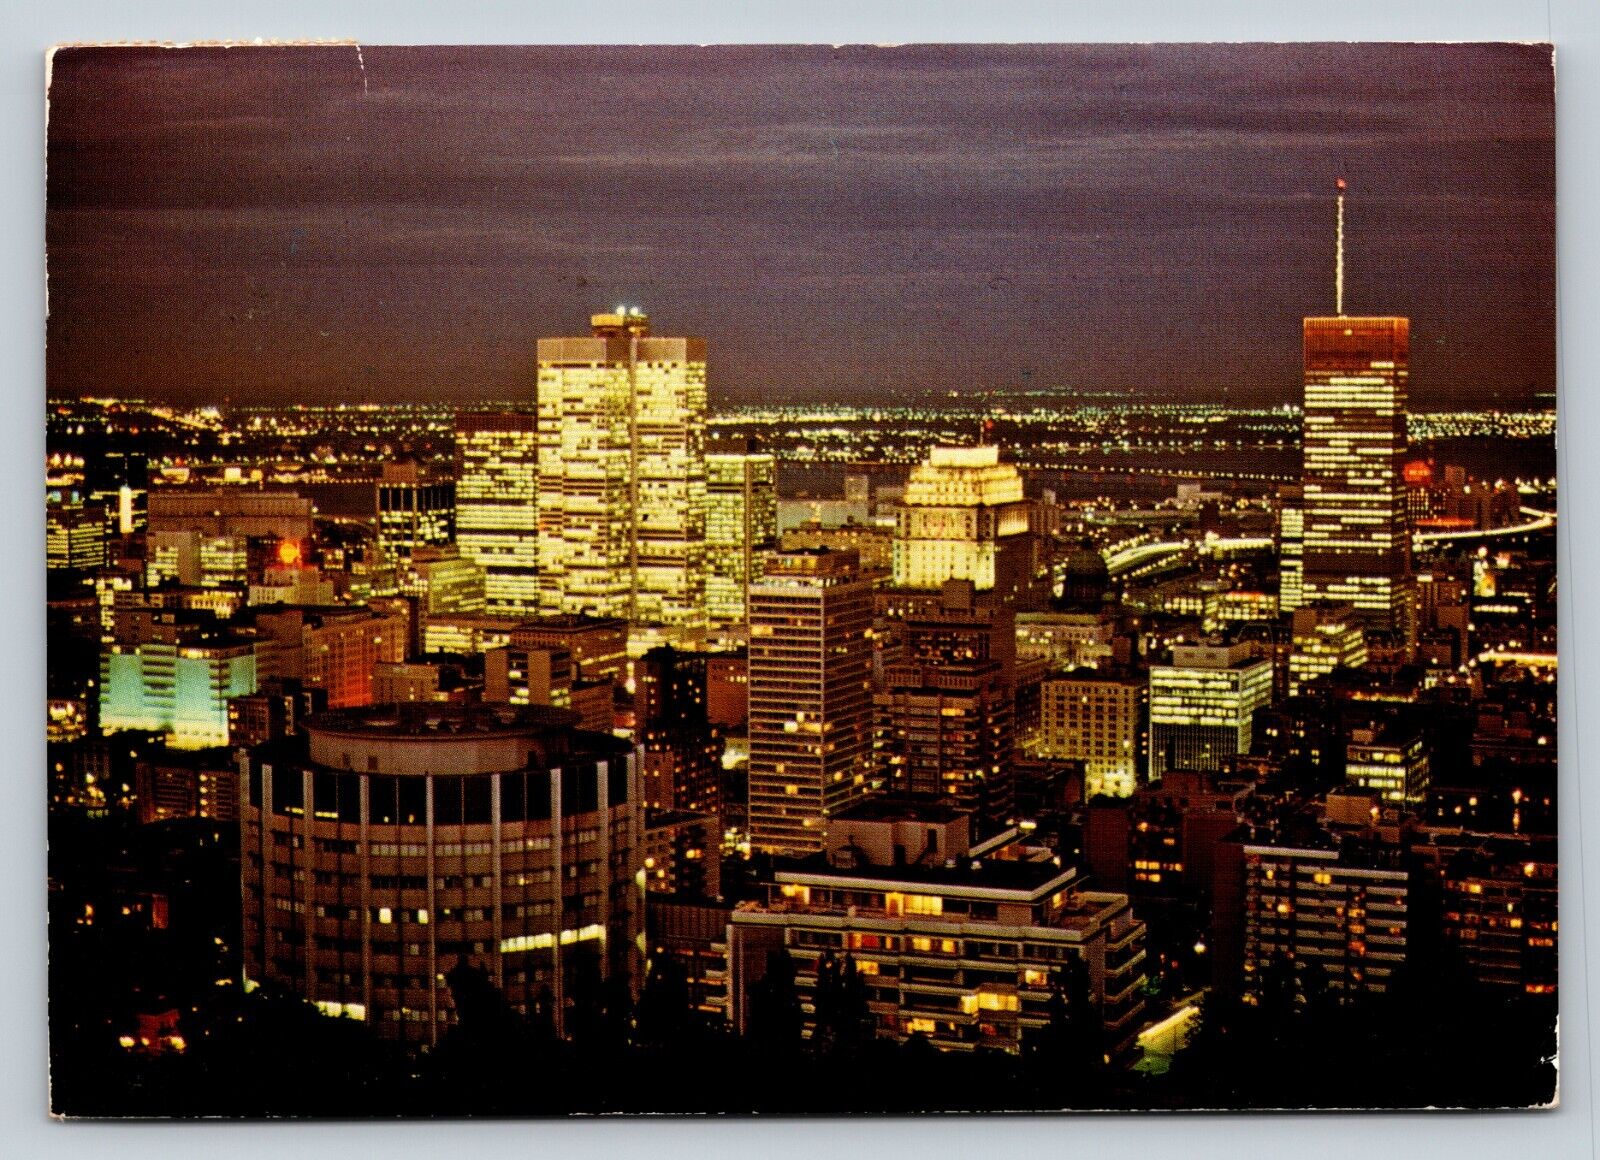 c1981 Aerial Night View of Montreal Quebec Canada 4x6